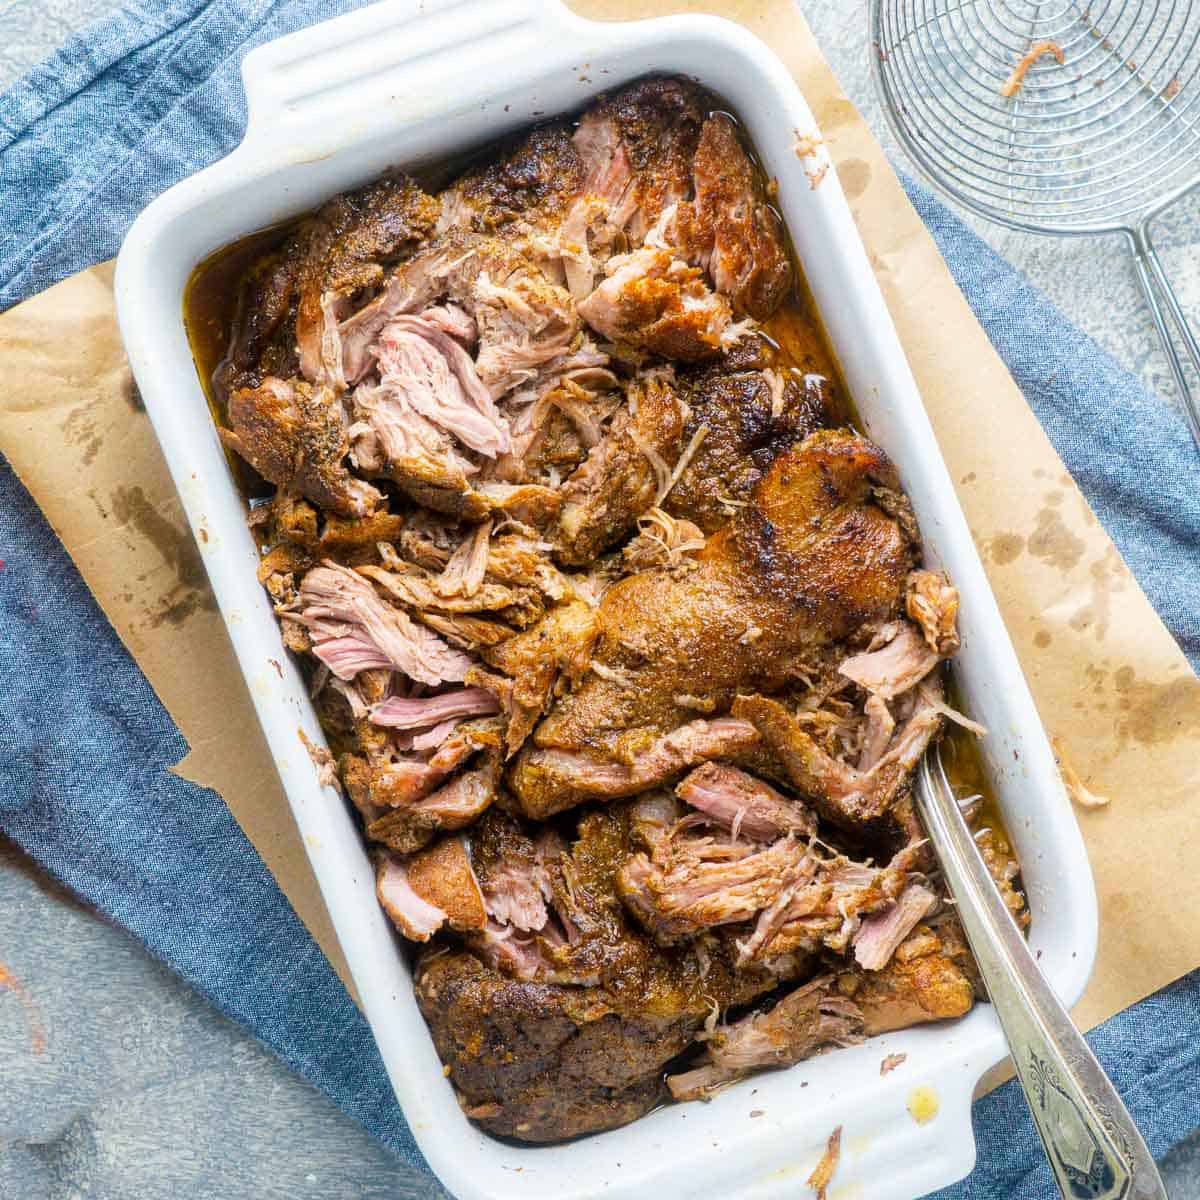 Slow cooker pulled pork with two forks in white serving dish on brown paper next to wire strainer